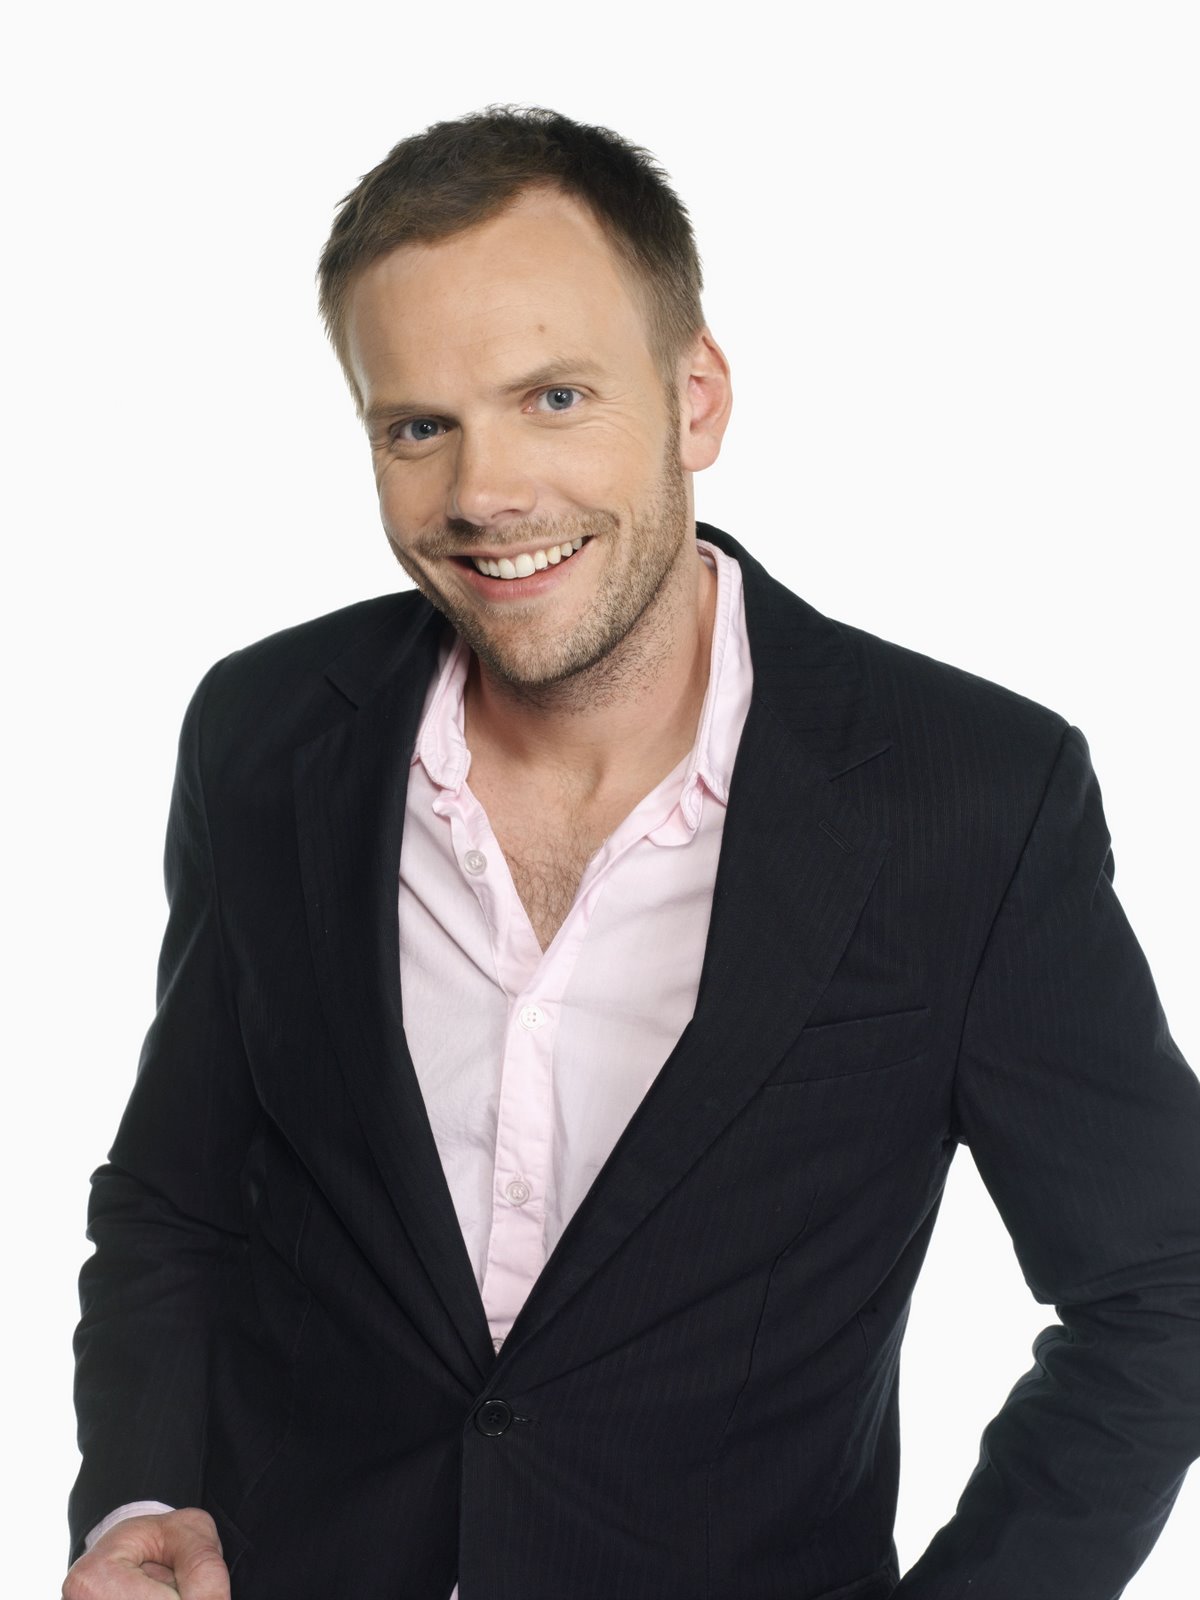 Hire Comedian and Actor Joel McHale for Your Event | PDA Speakers